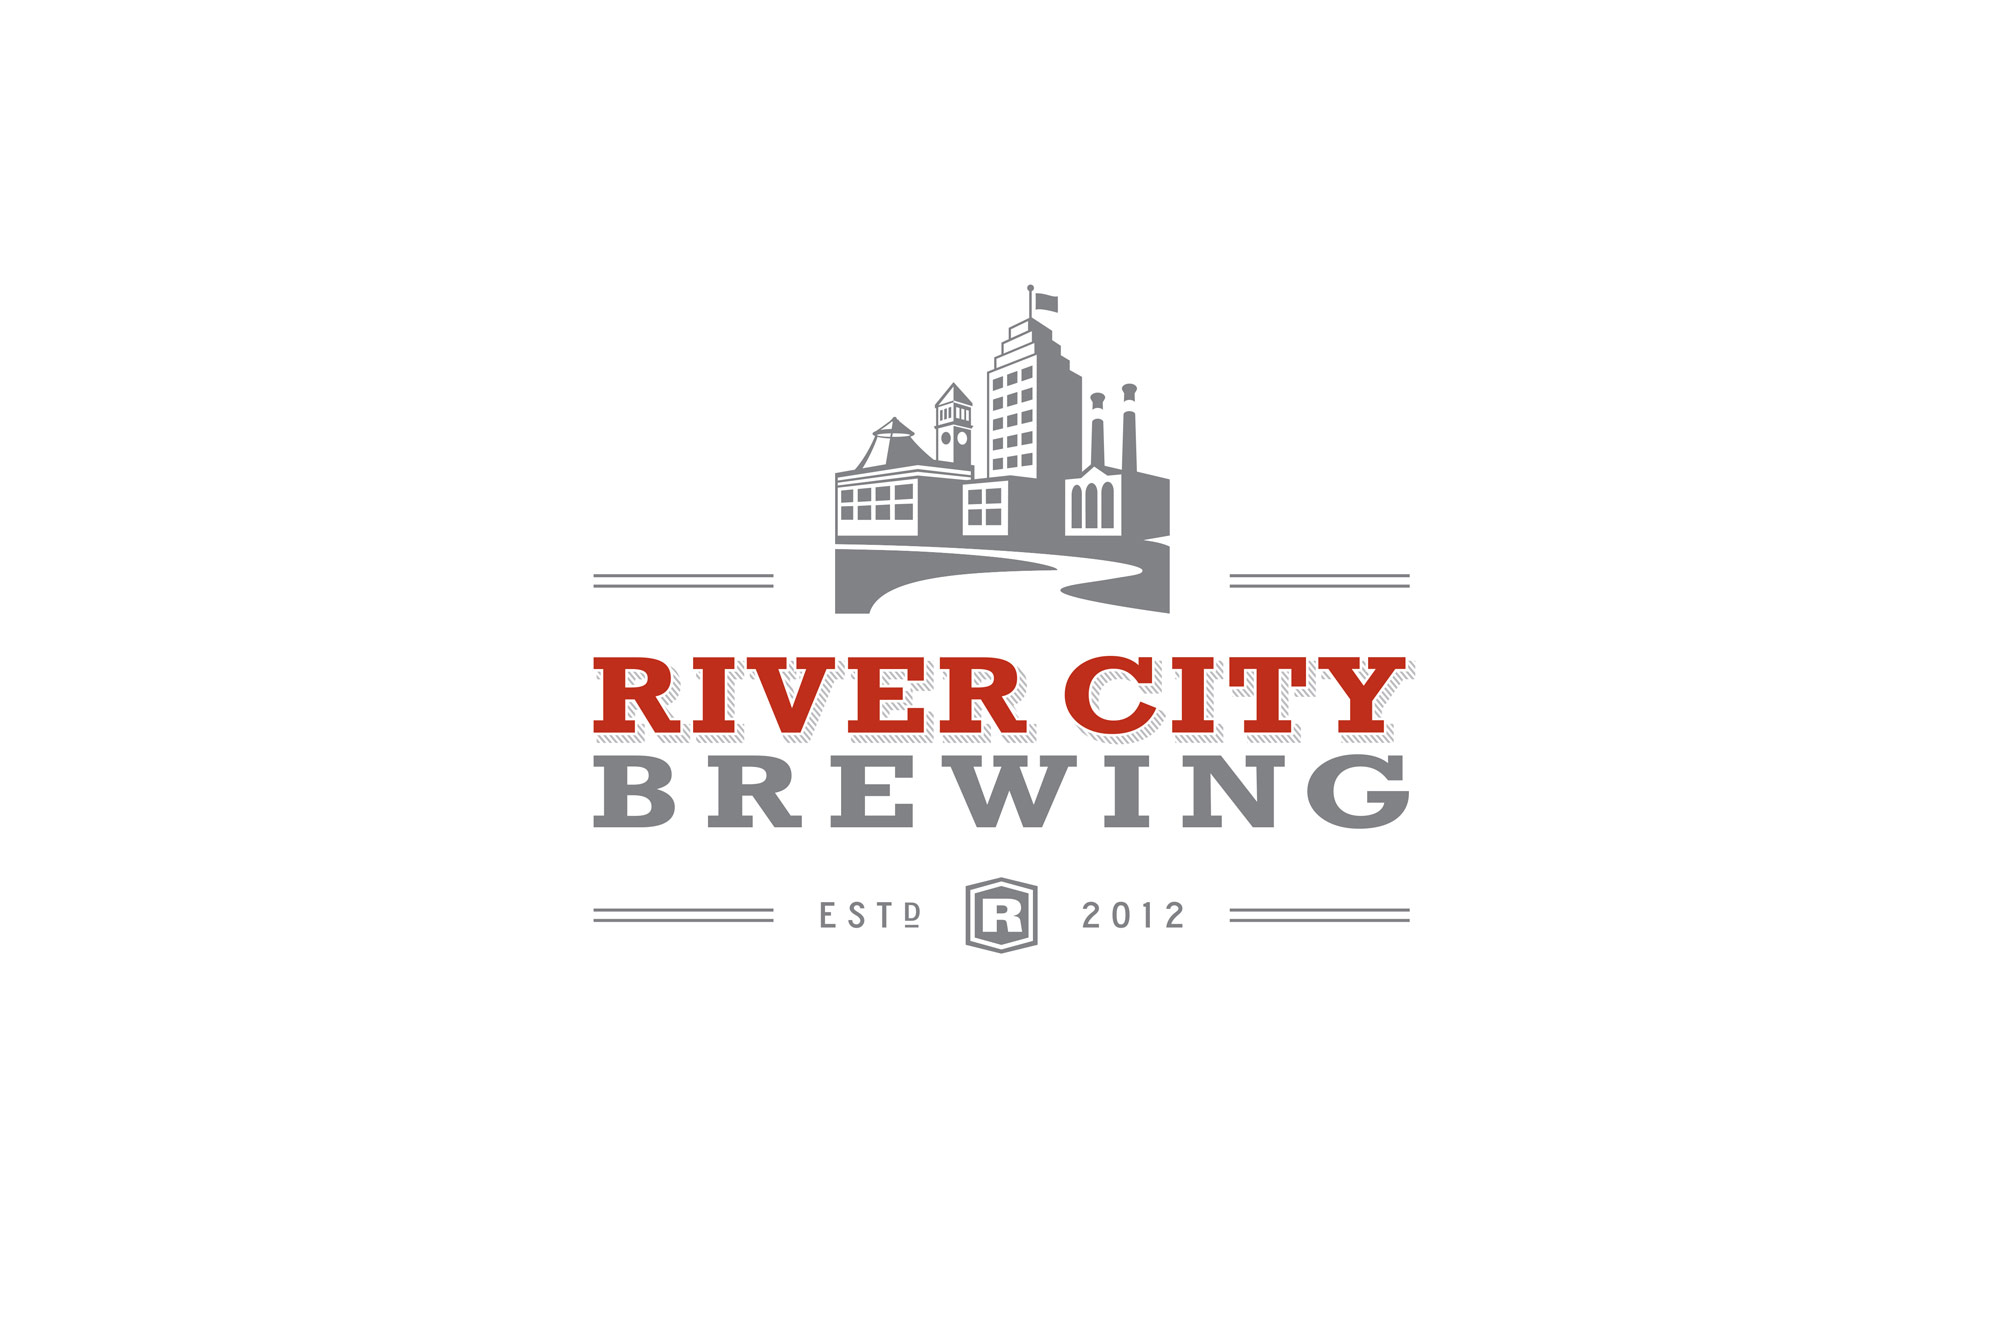 Brand logo design for craft beer company River City Brewing.